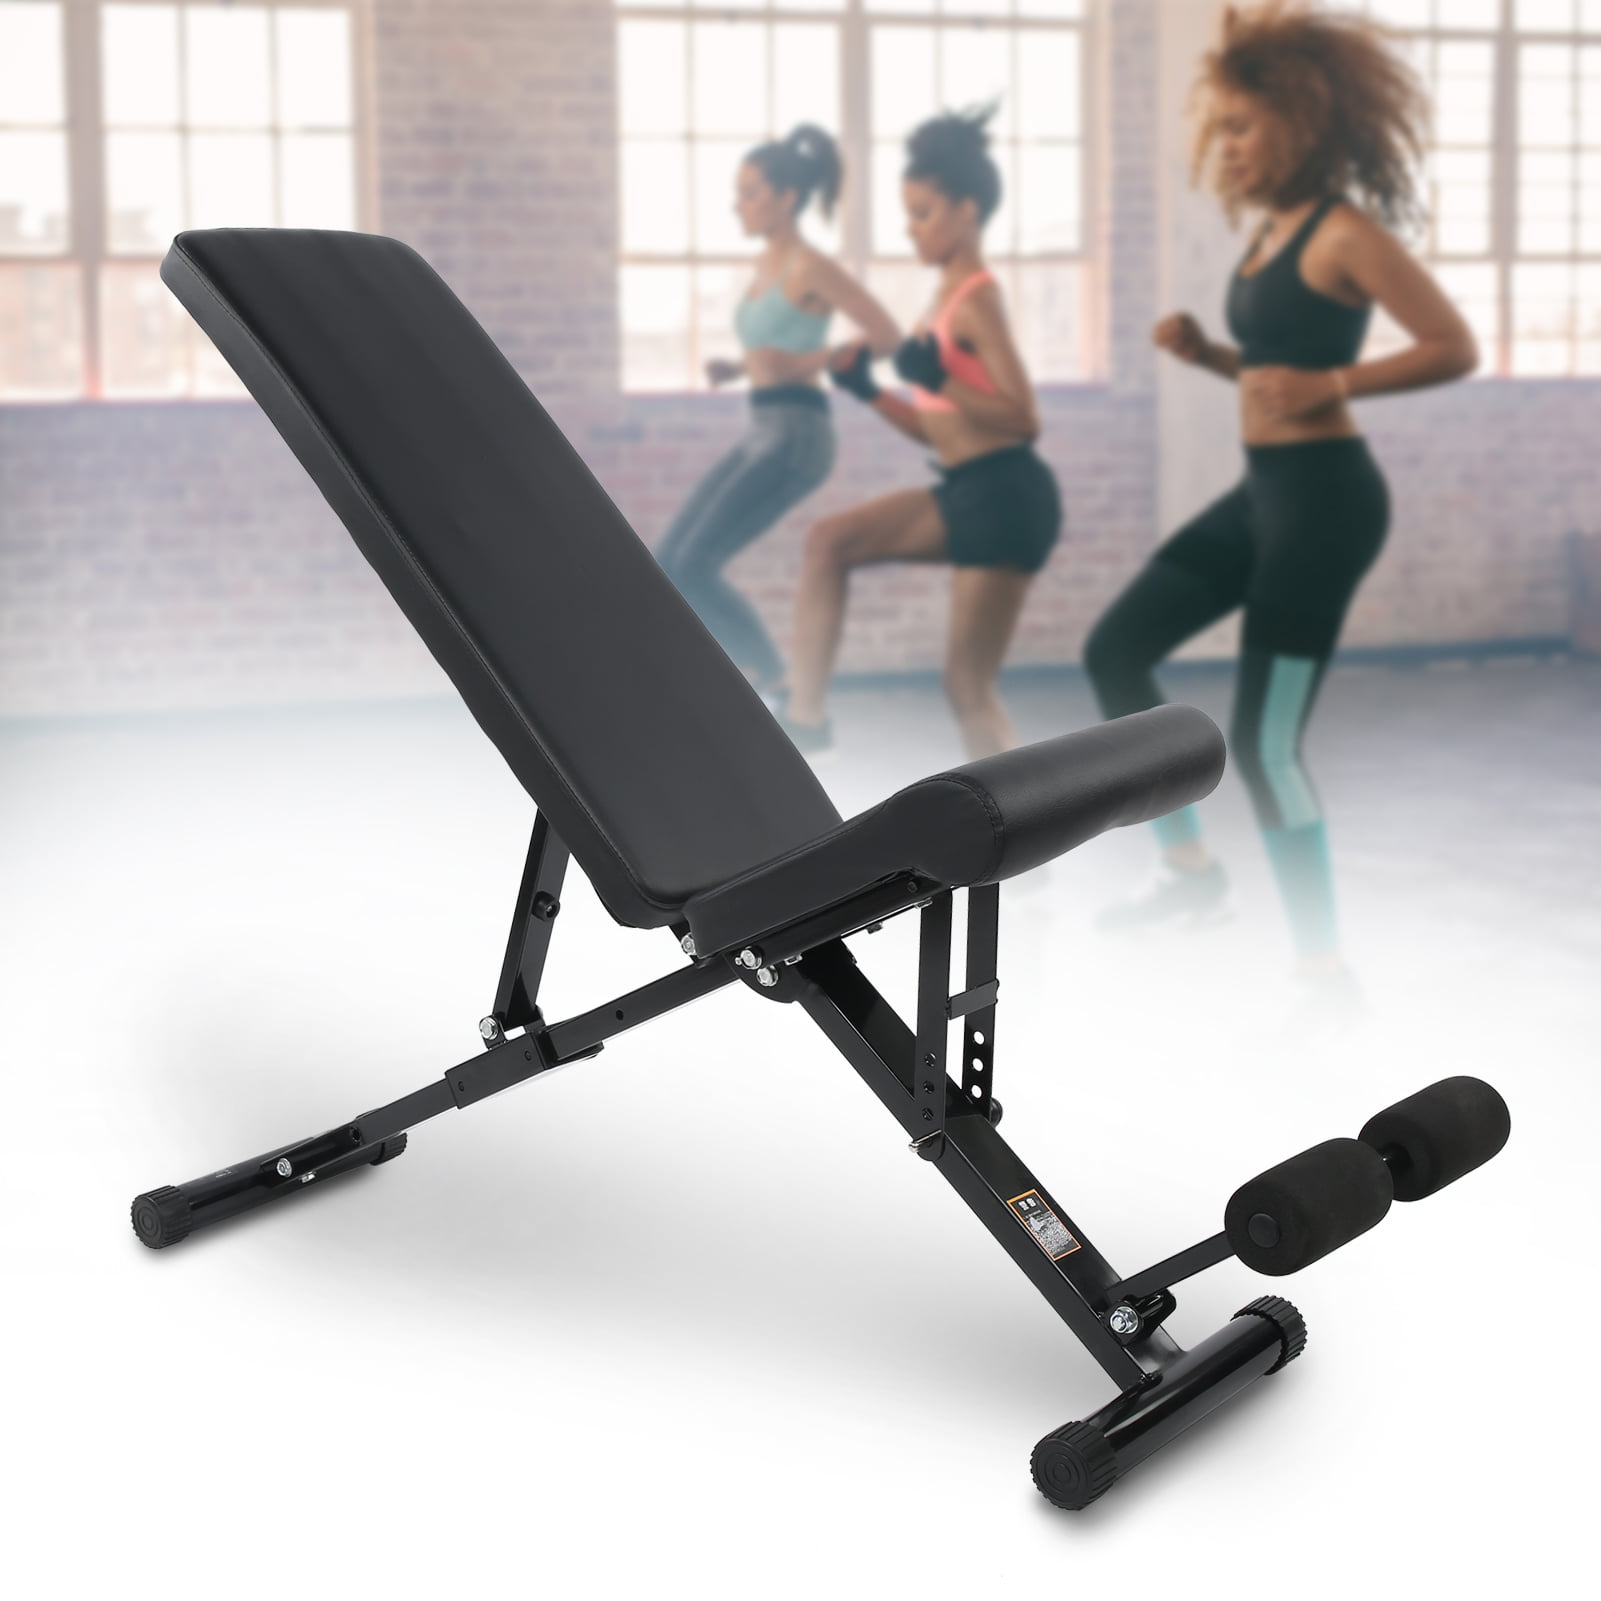 Details about   Foldable Fitness Adjustable Stool Multifunction Bench Workout Training Dumbbell 